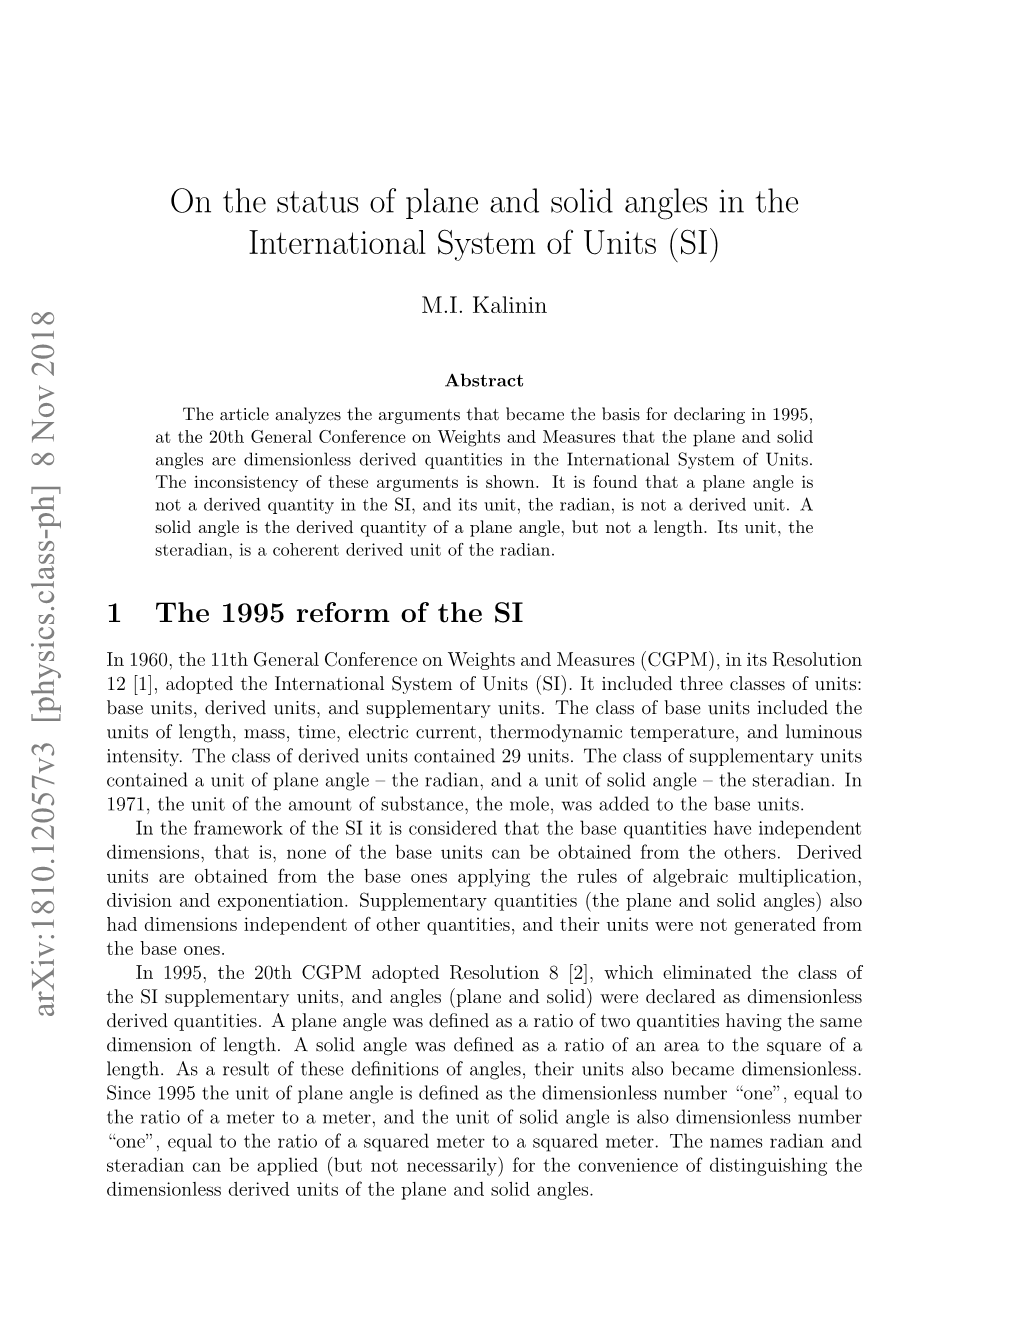 On the Status of Plane and Solid Angles in the International System of Units (SI)